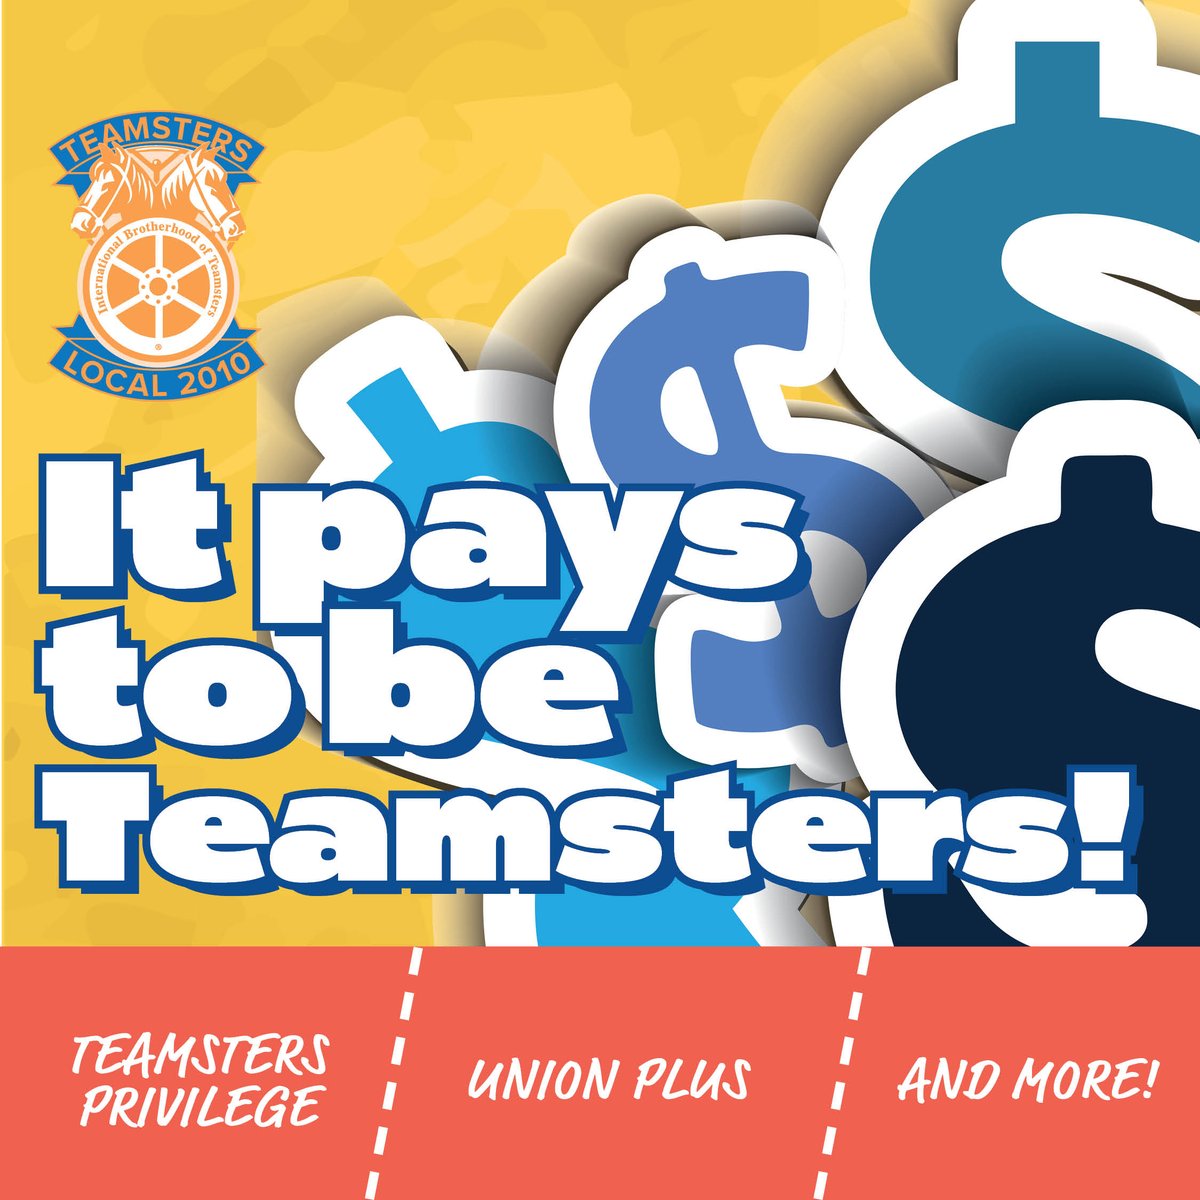 From Retiree Health Insurance to Professional Moving Discounts, our Union membership supports Teamsters workers both in the workplace and at home. Check out all the benefits available to members at teamsters2010.org/member-benefits ✊